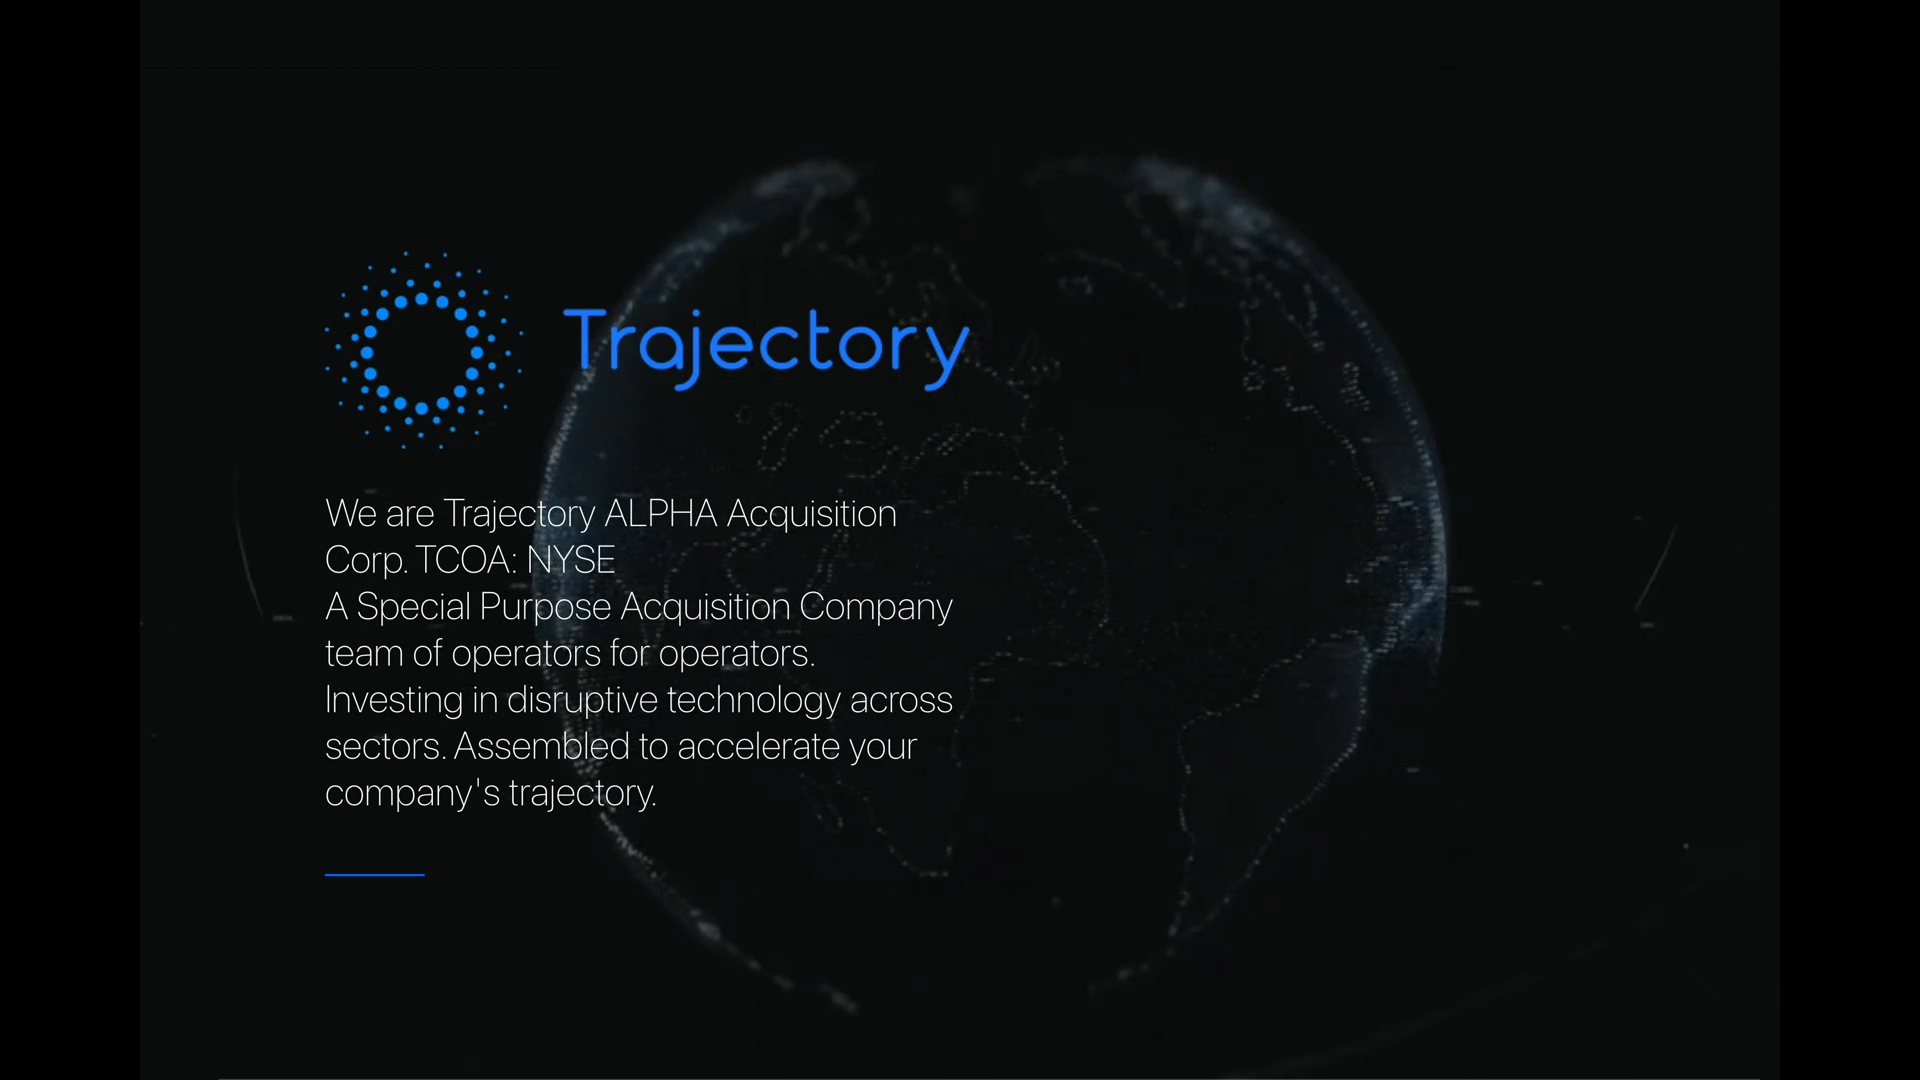 We are Trajectory ALPHA Acquisition Corp. TCOA: NYSE A Special Purpose Acquisition Company team of operators for operators. Investing in disruptive technology innovation across sectors. Assembled to accelerate your company's trajectory.